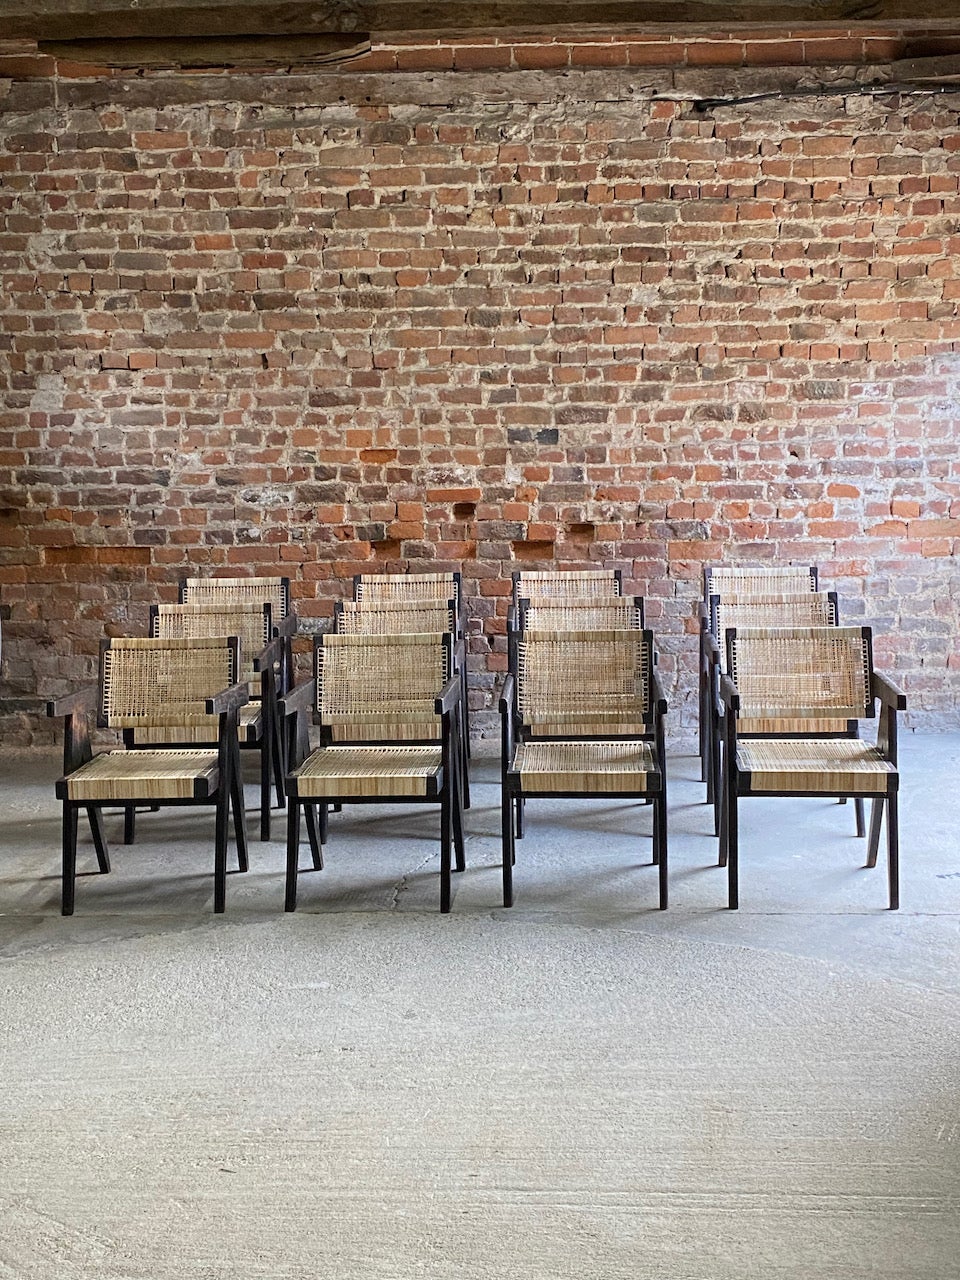 Pierre Jeanneret ‘Black’ dining chairs set of 12 certificate by Jacques Dworczak 1955.

Sublime and rare set of twelve Pierre Jeanneret Model PJ-010101L ‘Black’ Office or Dining Chairs Chandigarh Circa 1955, the chairs are fully certified and